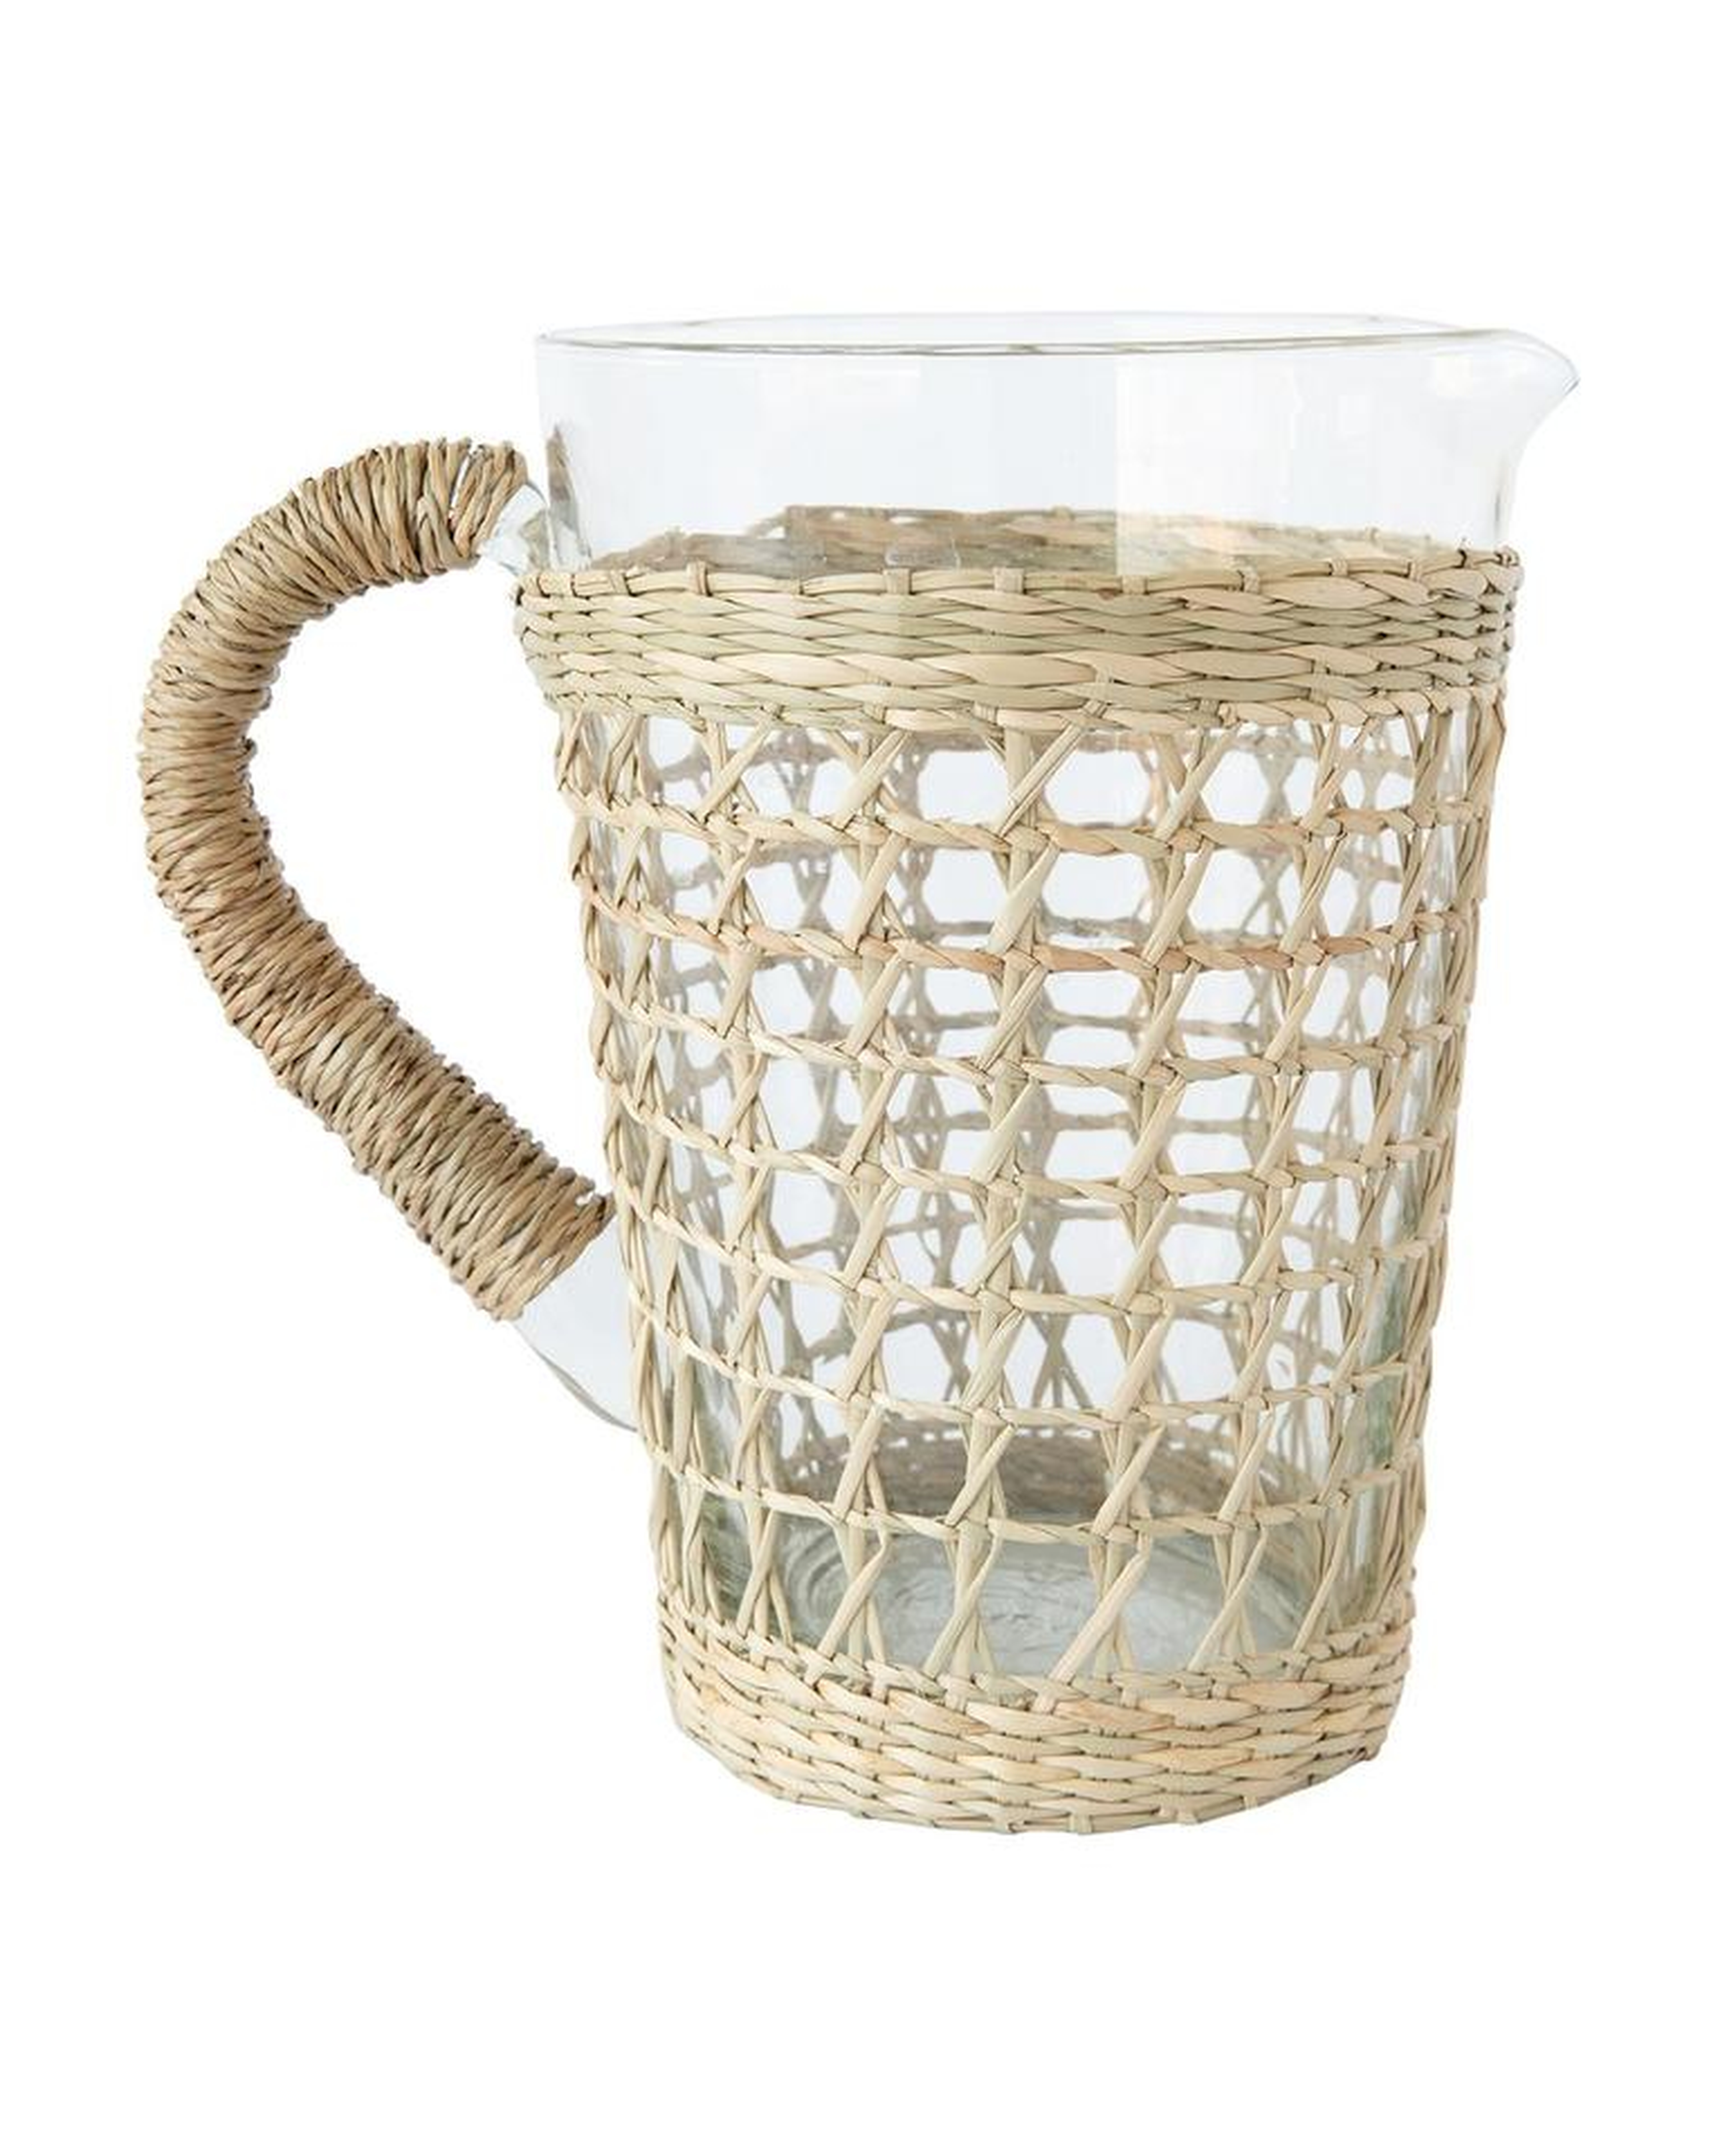 SEAGRASS CAGE PITCHER - McGee & Co.